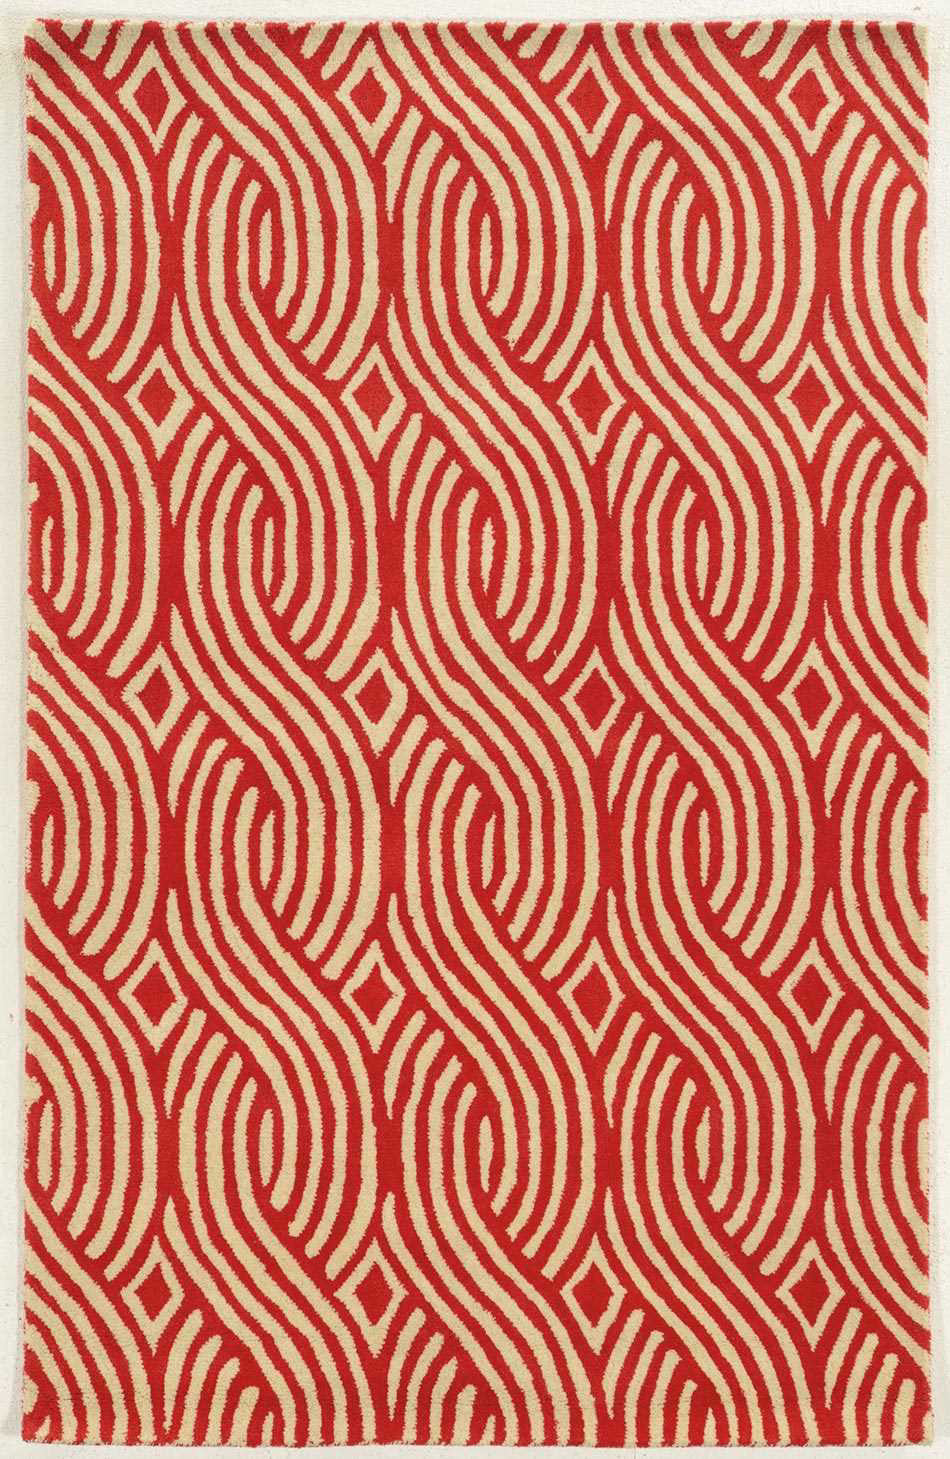 Rizzy Julian Pointe JP8613 Ivory/Red Area Rug main image